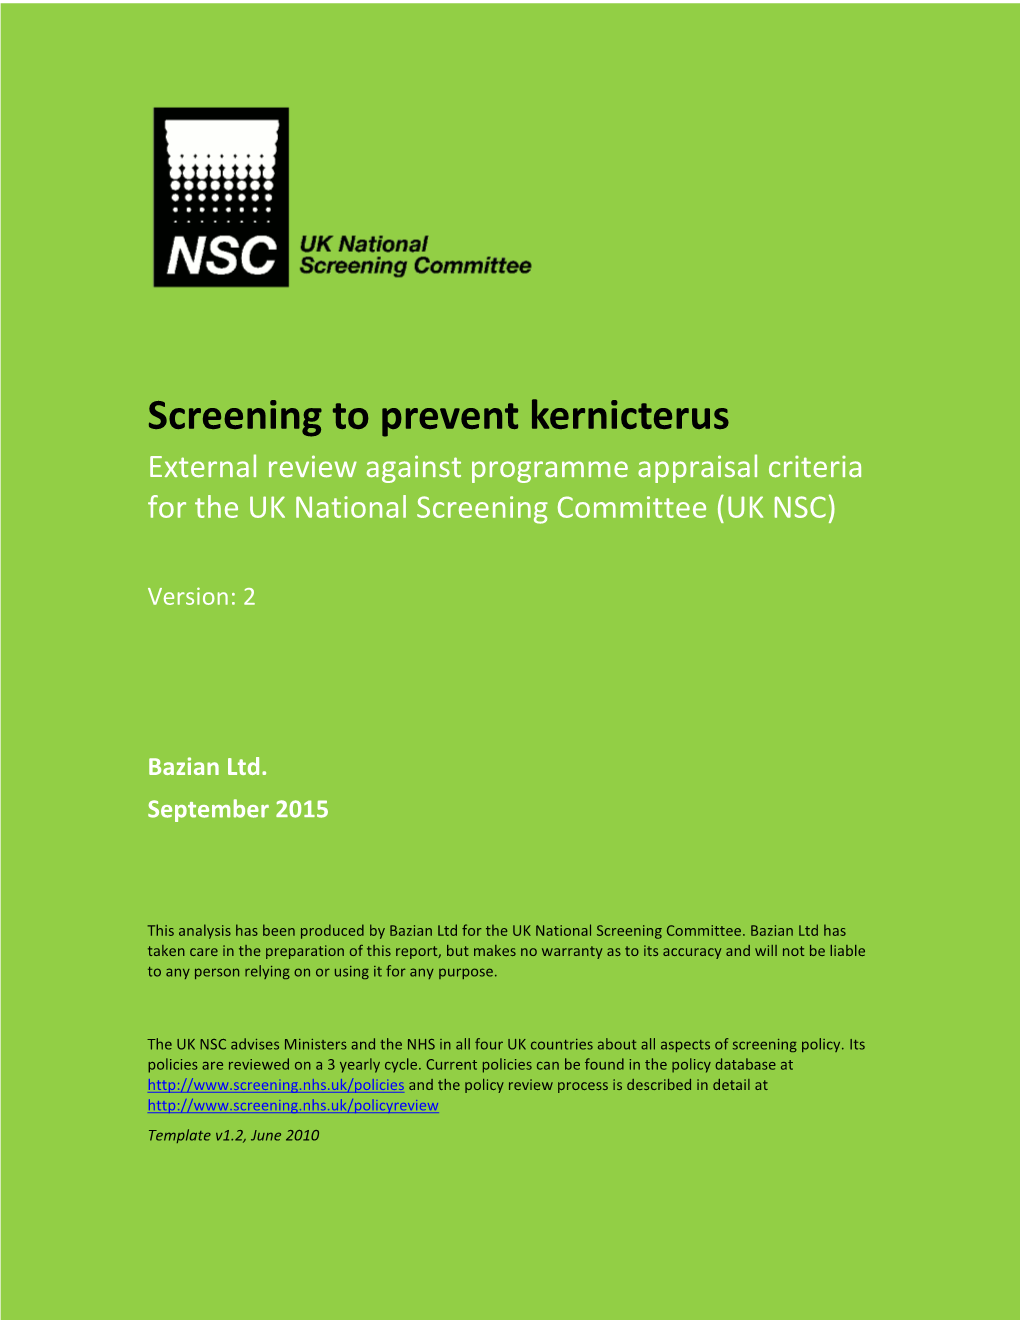 Screening to Prevent Kernicterus External Review Against Programme Appraisal Criteria for the UK National Screening Committee (UK NSC)